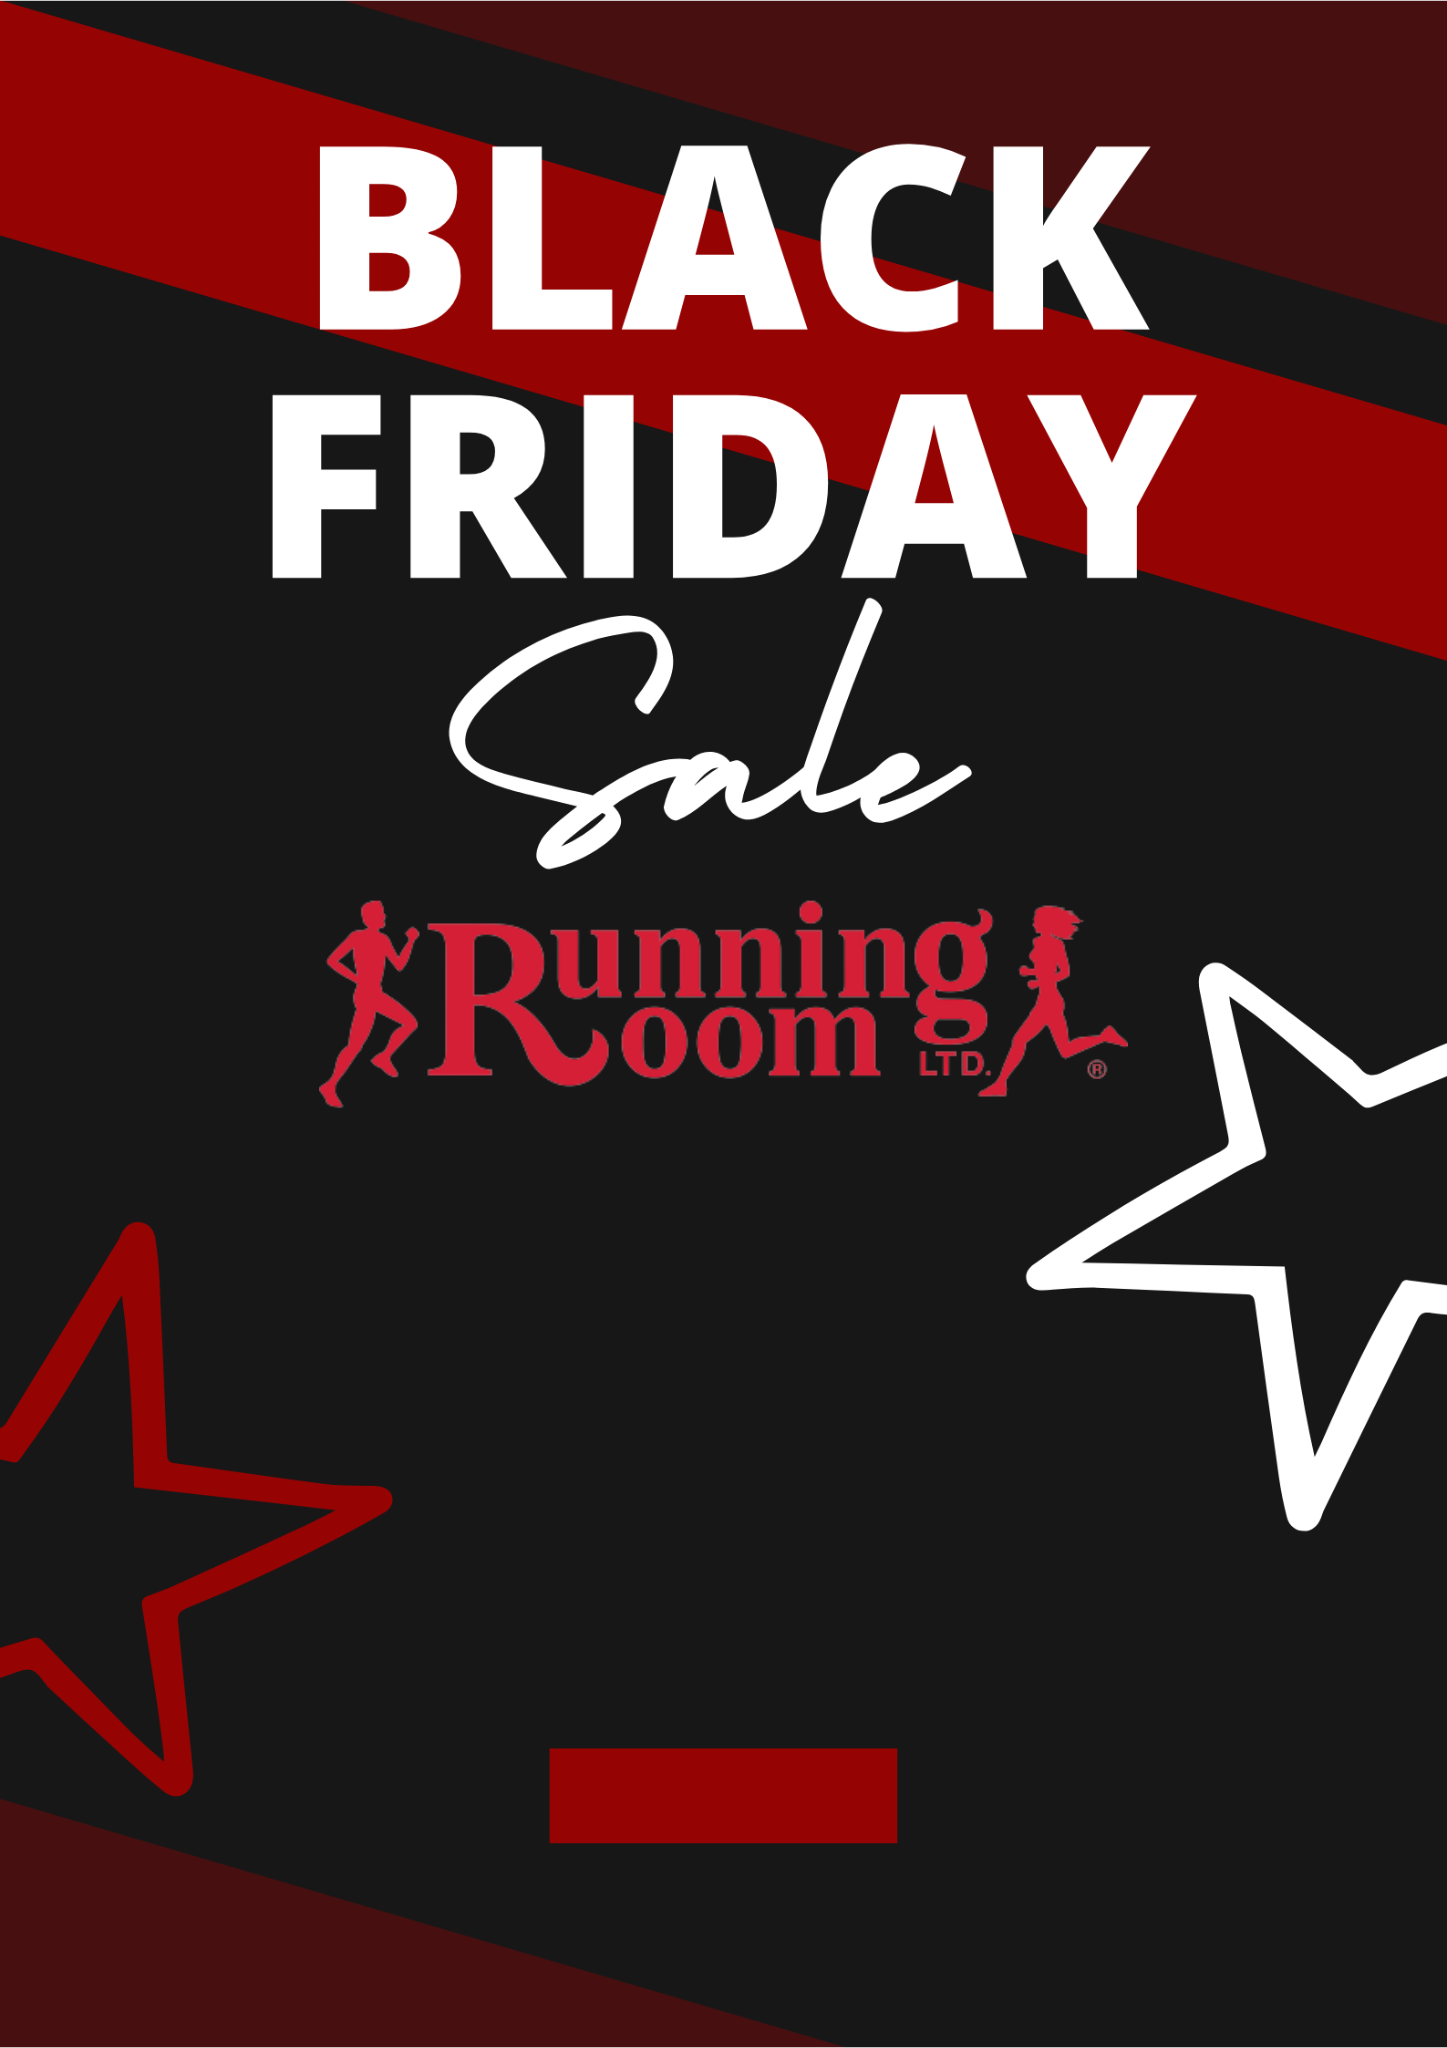 Running Room Promotional flyers